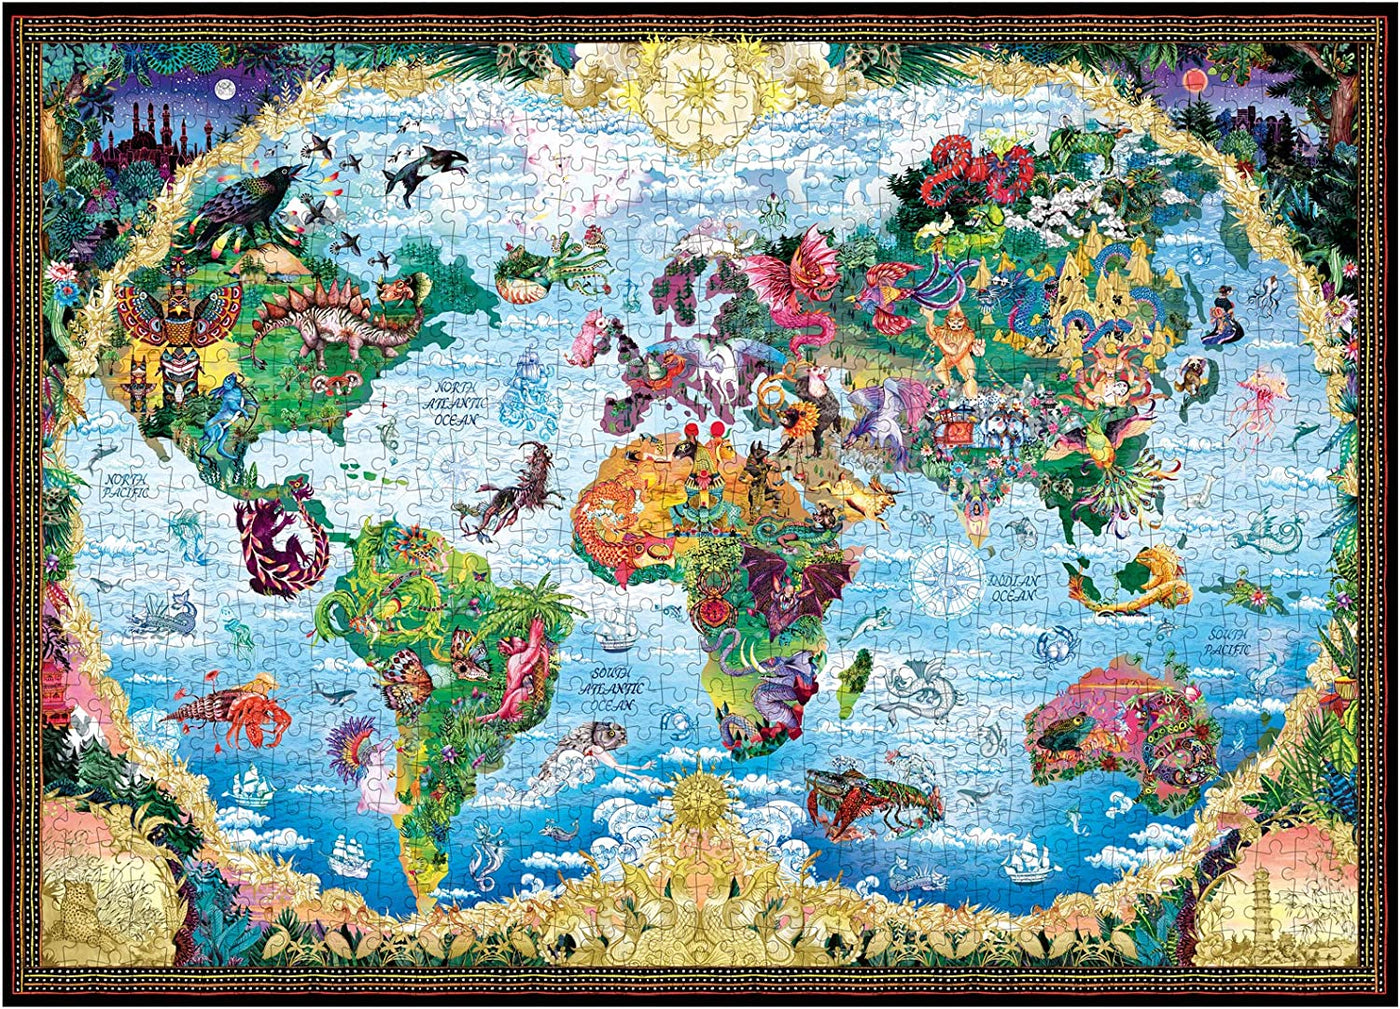 The Mythical World | 1,000 Piece Jigsaw Puzzle